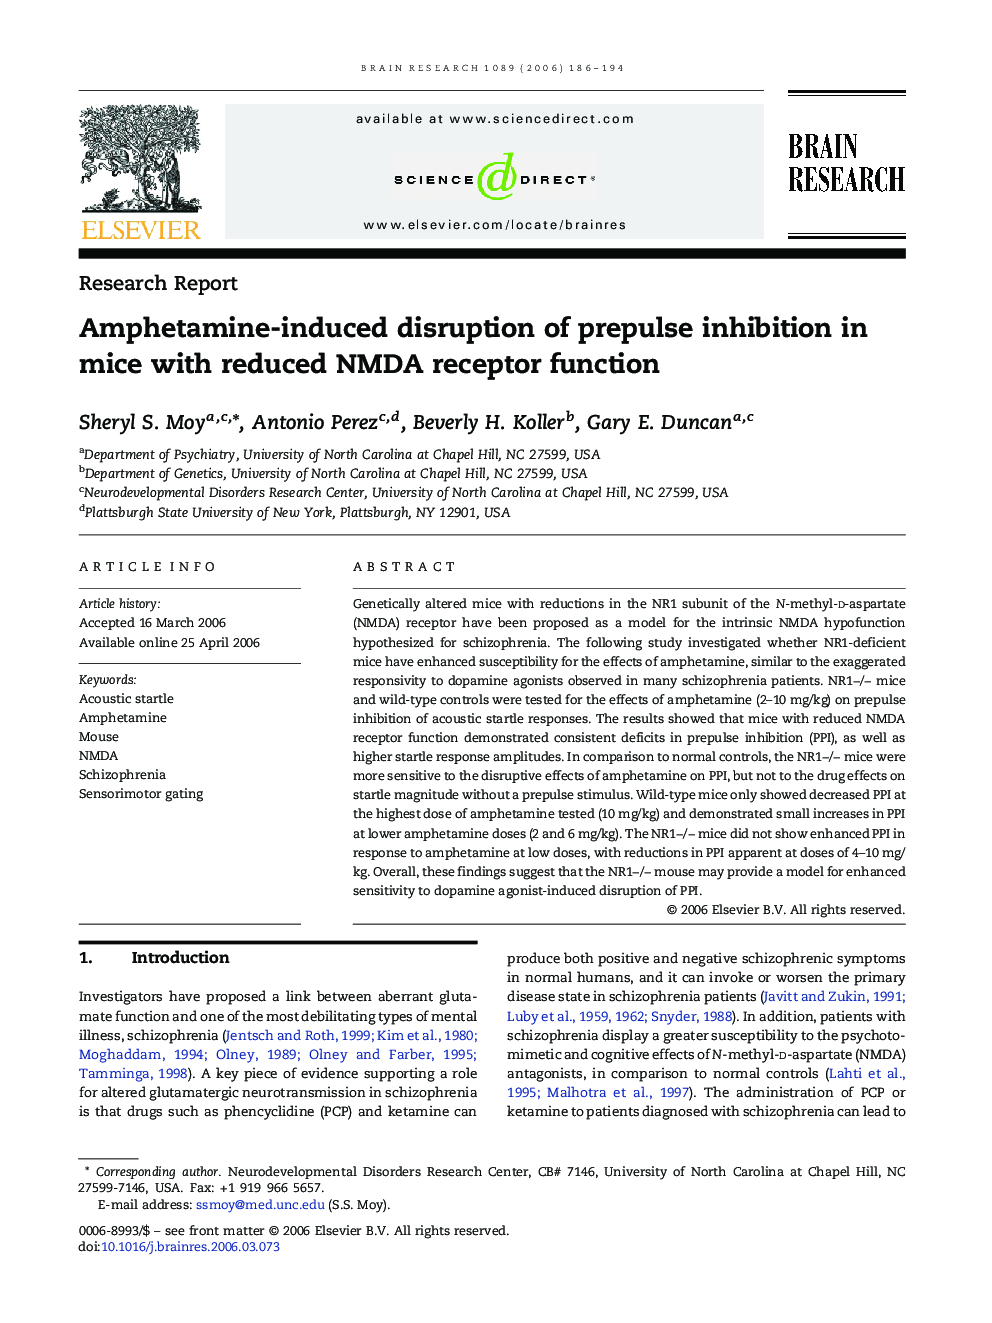 Amphetamine-induced disruption of prepulse inhibition in mice with reduced NMDA receptor function